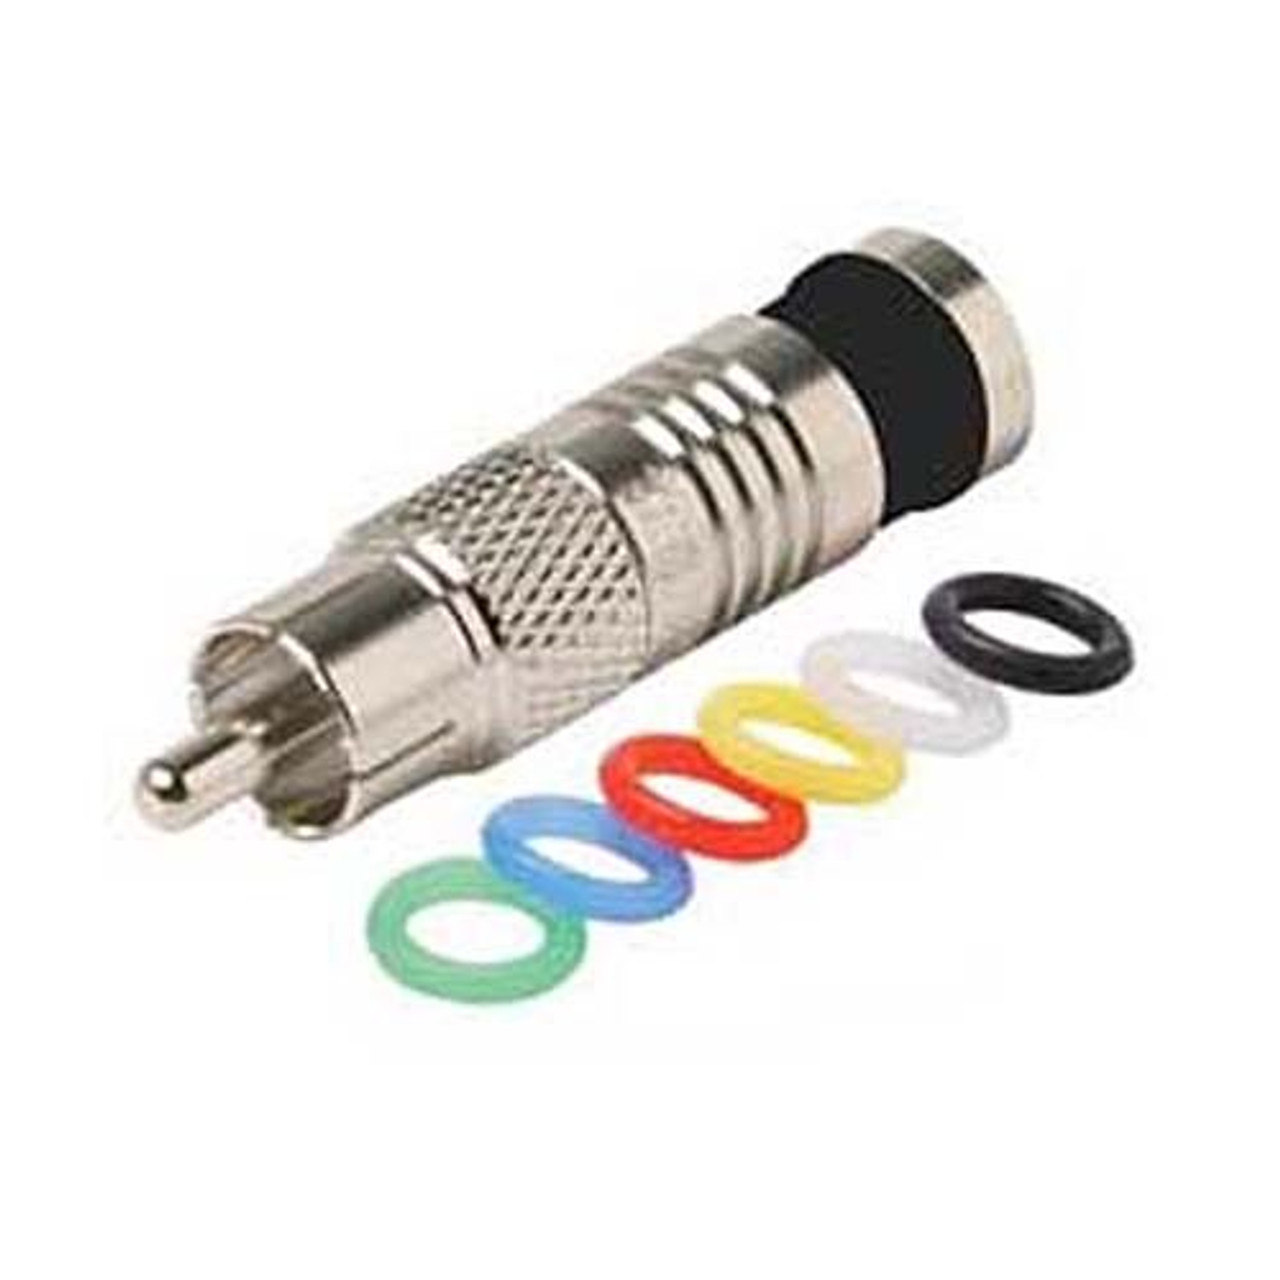 Steren 200-066-10 RCA to RG6 Cable Compression Connector with Color Bands Anti Corrosion 10 Pack Nickel Plated Brass Six Color Bands AV Plug Signal Component Replacement RCA Perma Seal, Part # 200066-10